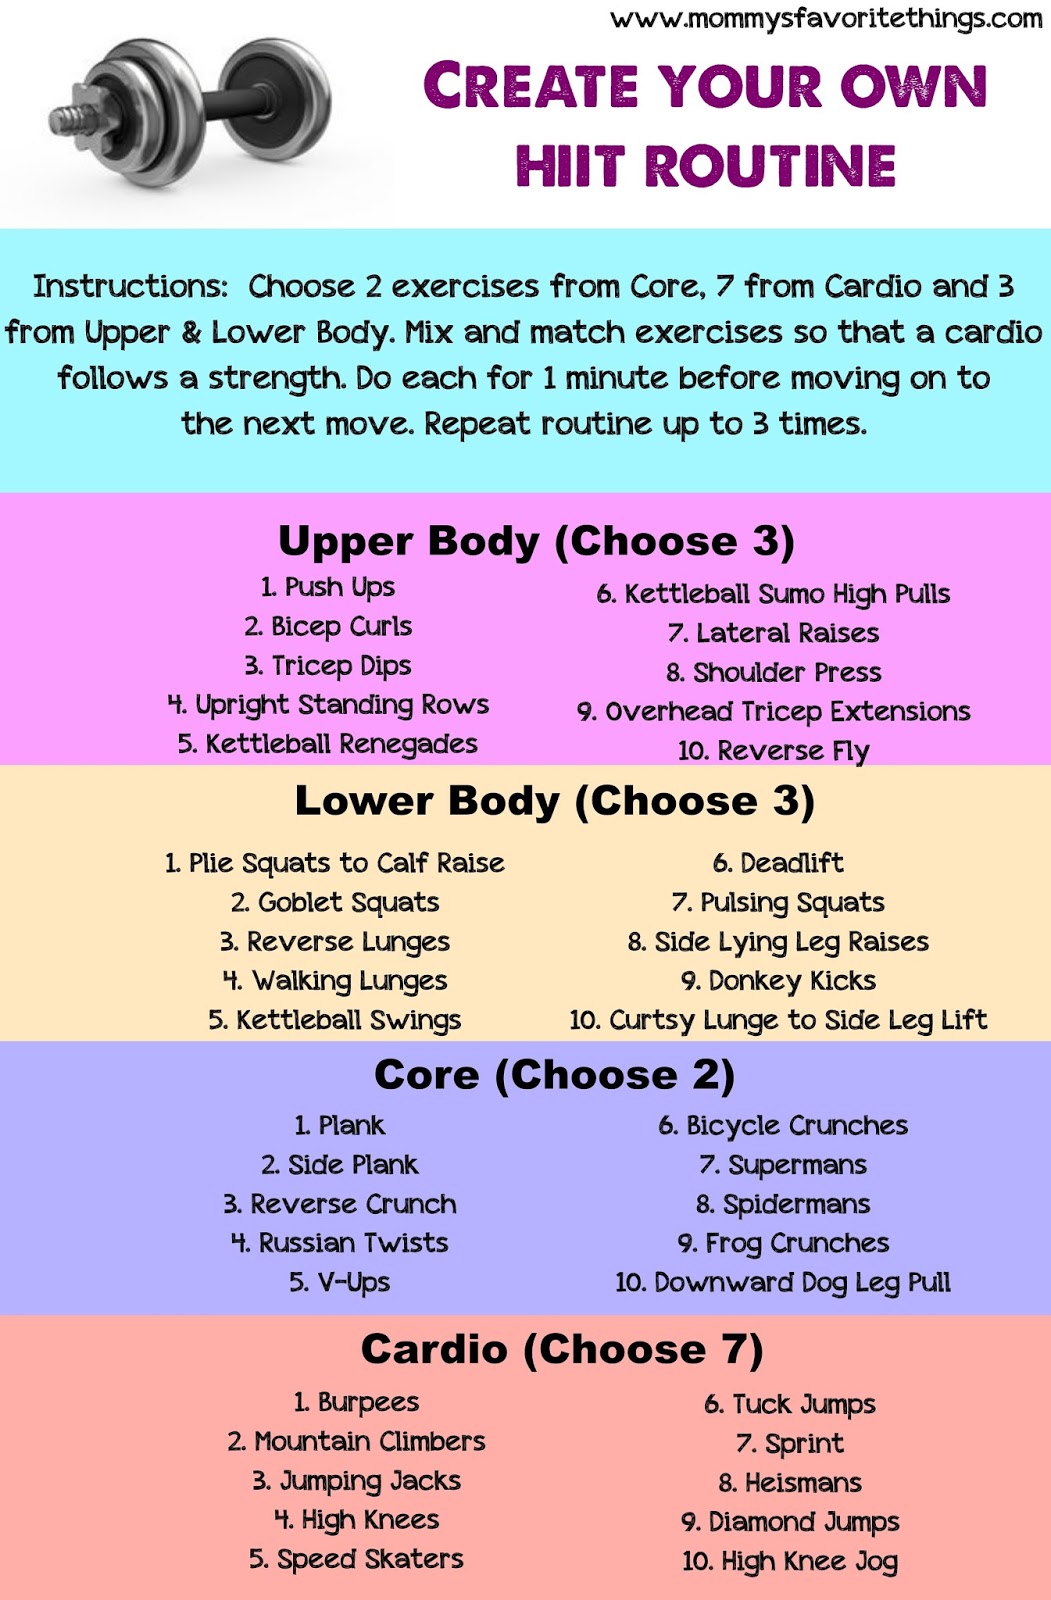 30 Minute Hiit Workout Plan For Beginners for Women